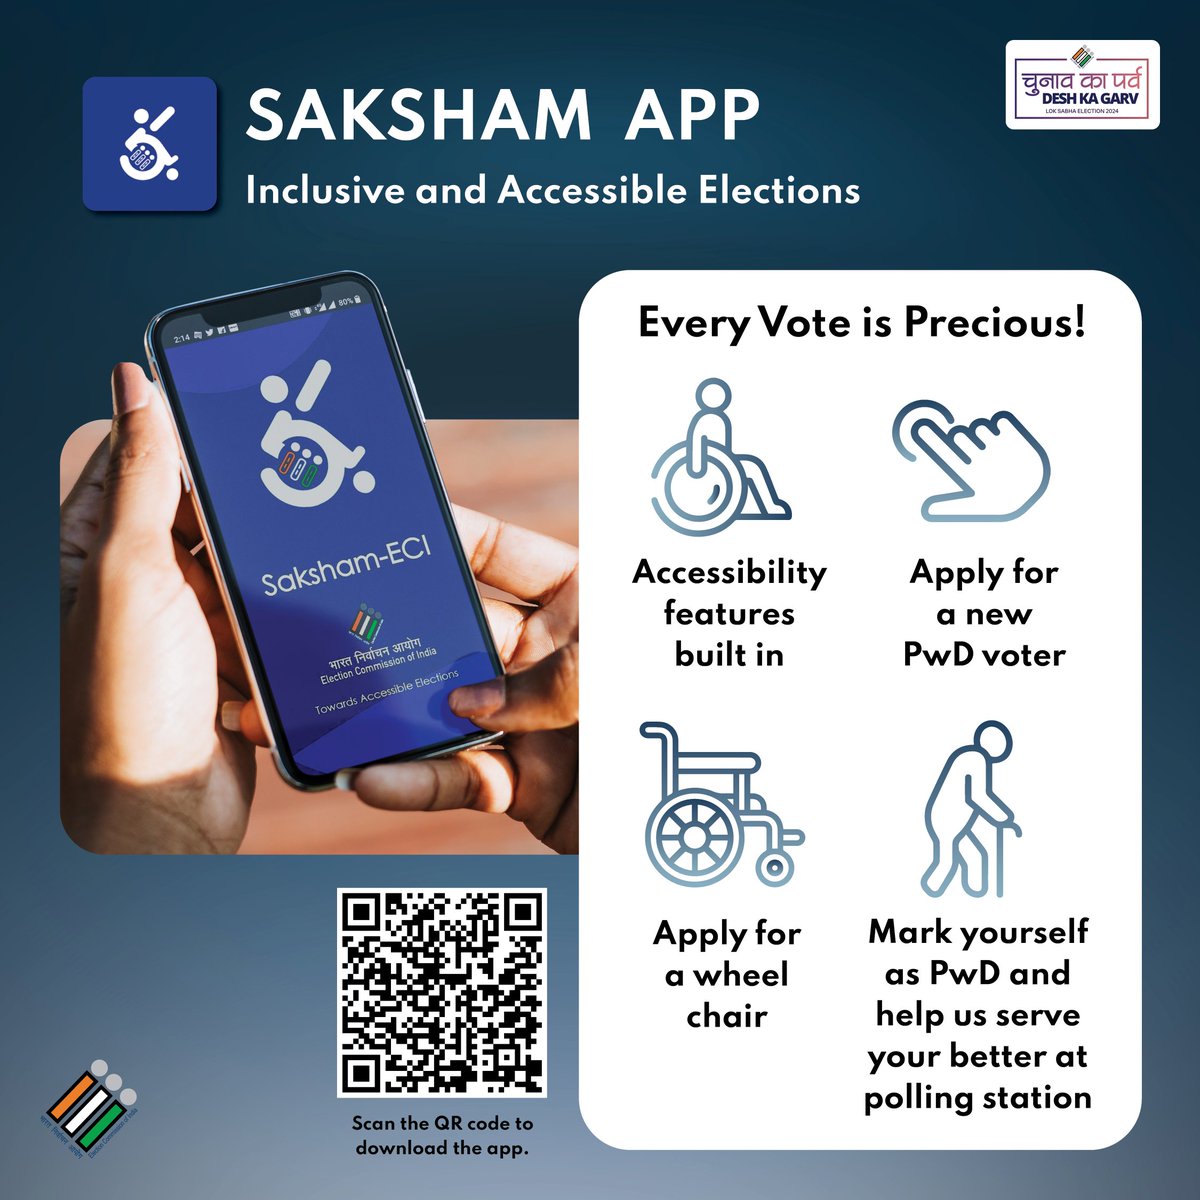 #Inclusive and #AccessibleElections for a stronger democracy! 

Using our App, you can :
✅ Apply as a new PwD voter 
✅ Apply for wheelchair 
✅ Mark yourself as PWD and help us serve you better at polling station.

#ECI #Elections2024 #ChunavKaParv #DeshKaGarv